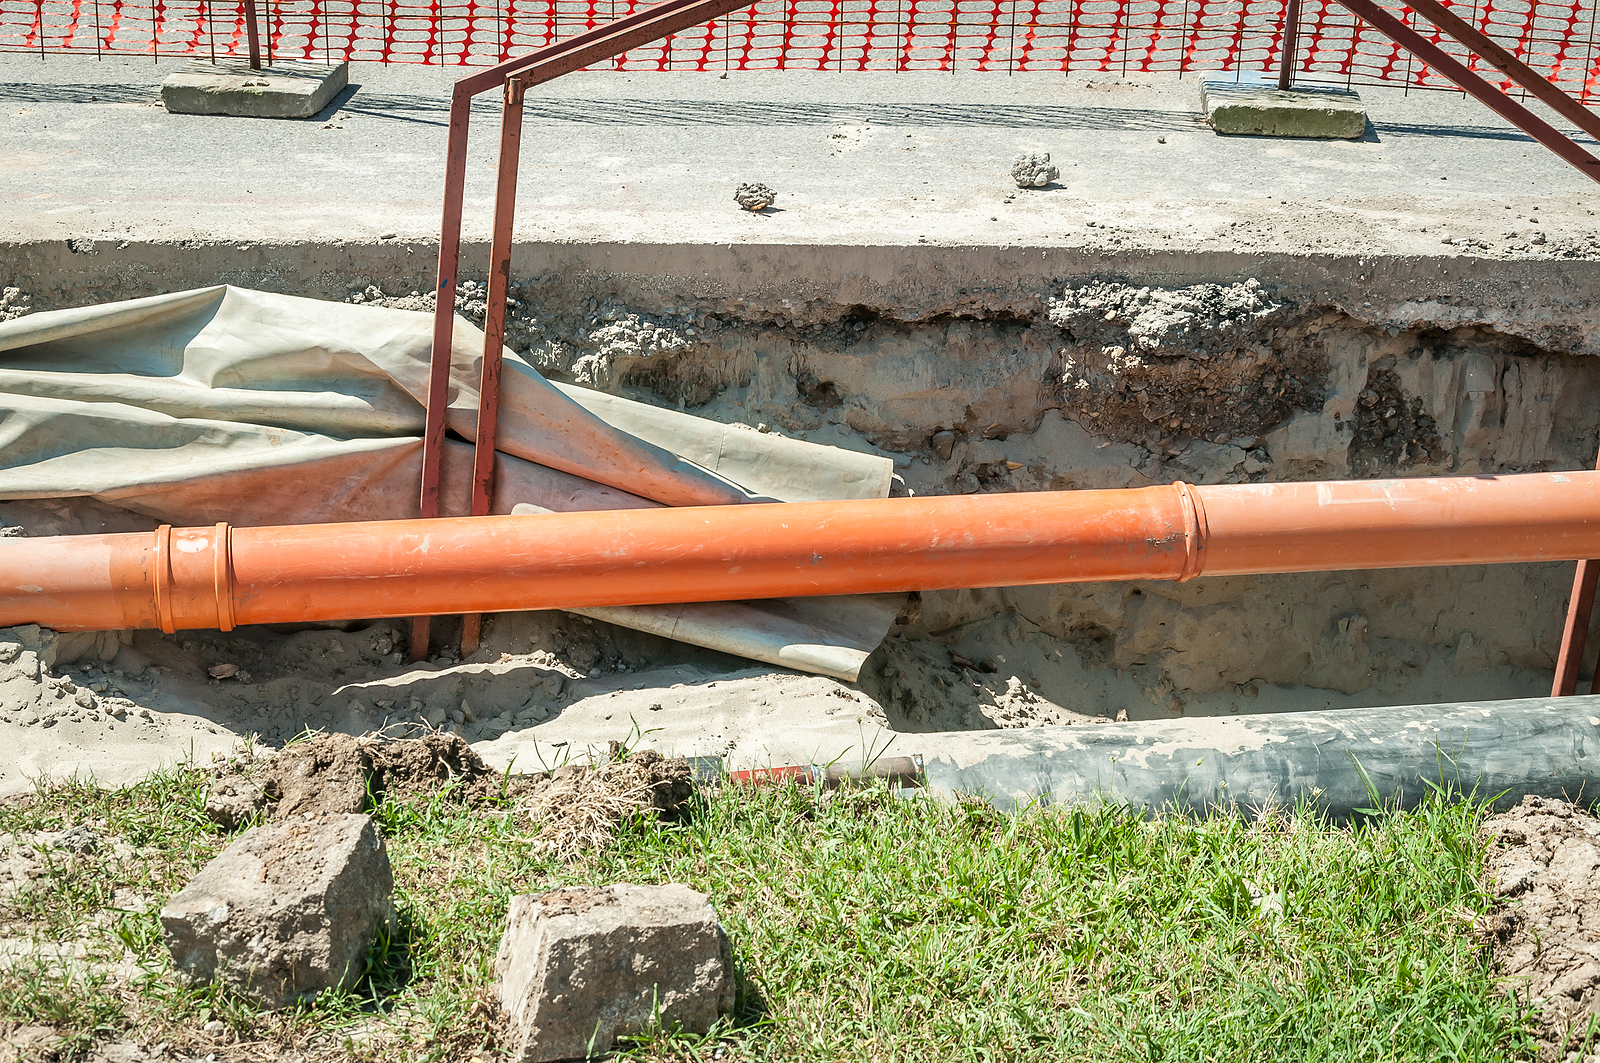 commercial gas pipework - excavation site with visible pipes